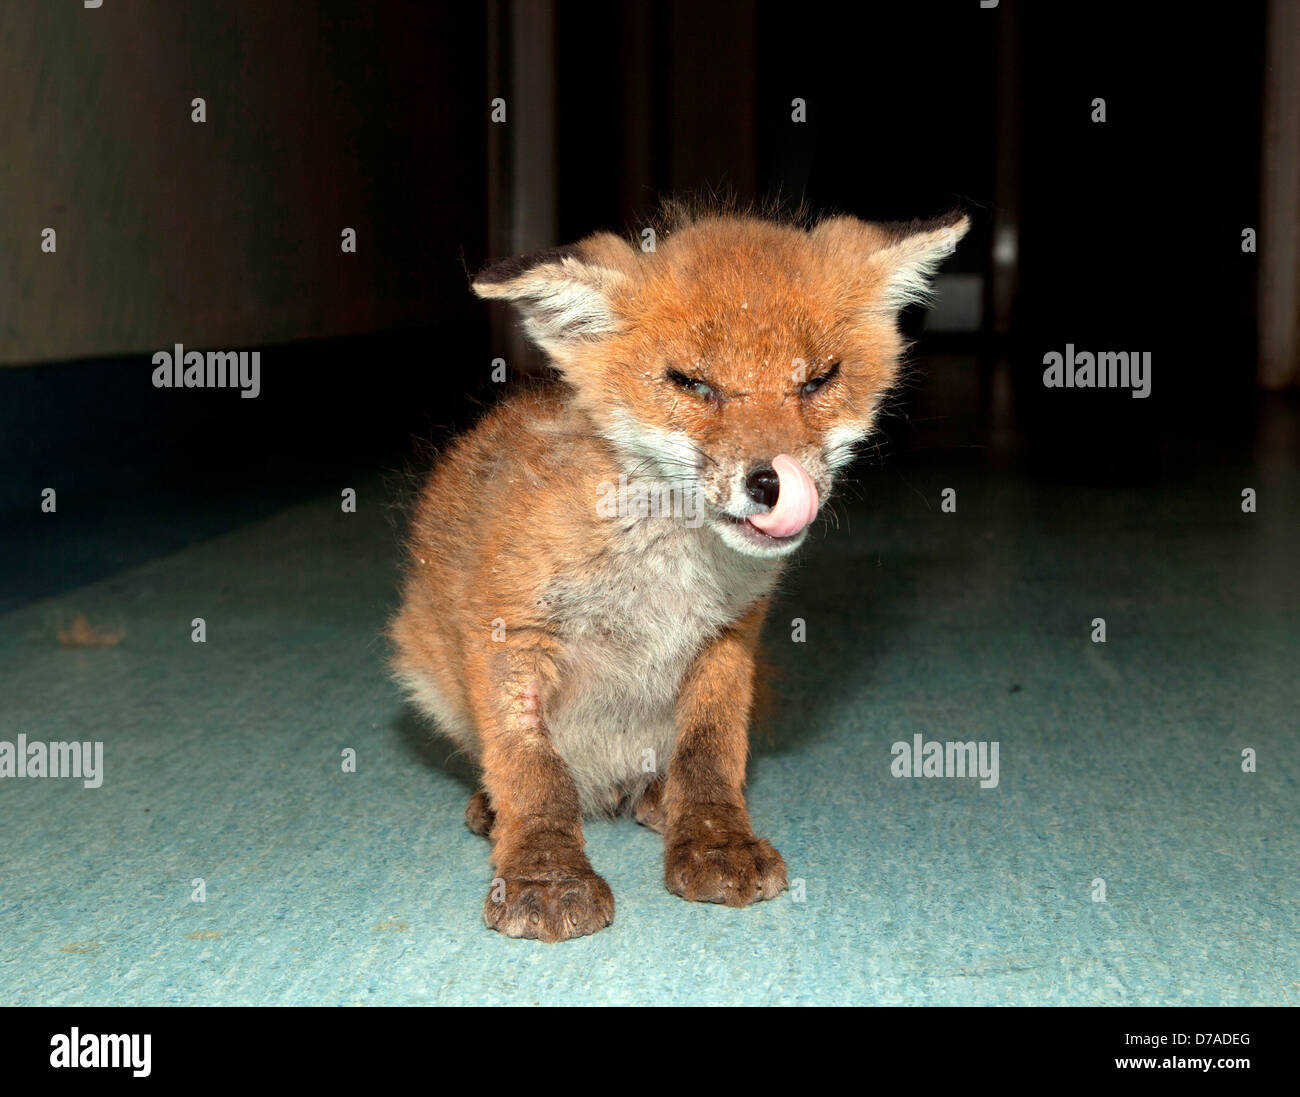 Fox Vulpes vulpes cub infected sarcoptes Mange mite Sarcoptes scabei) Stock Photo